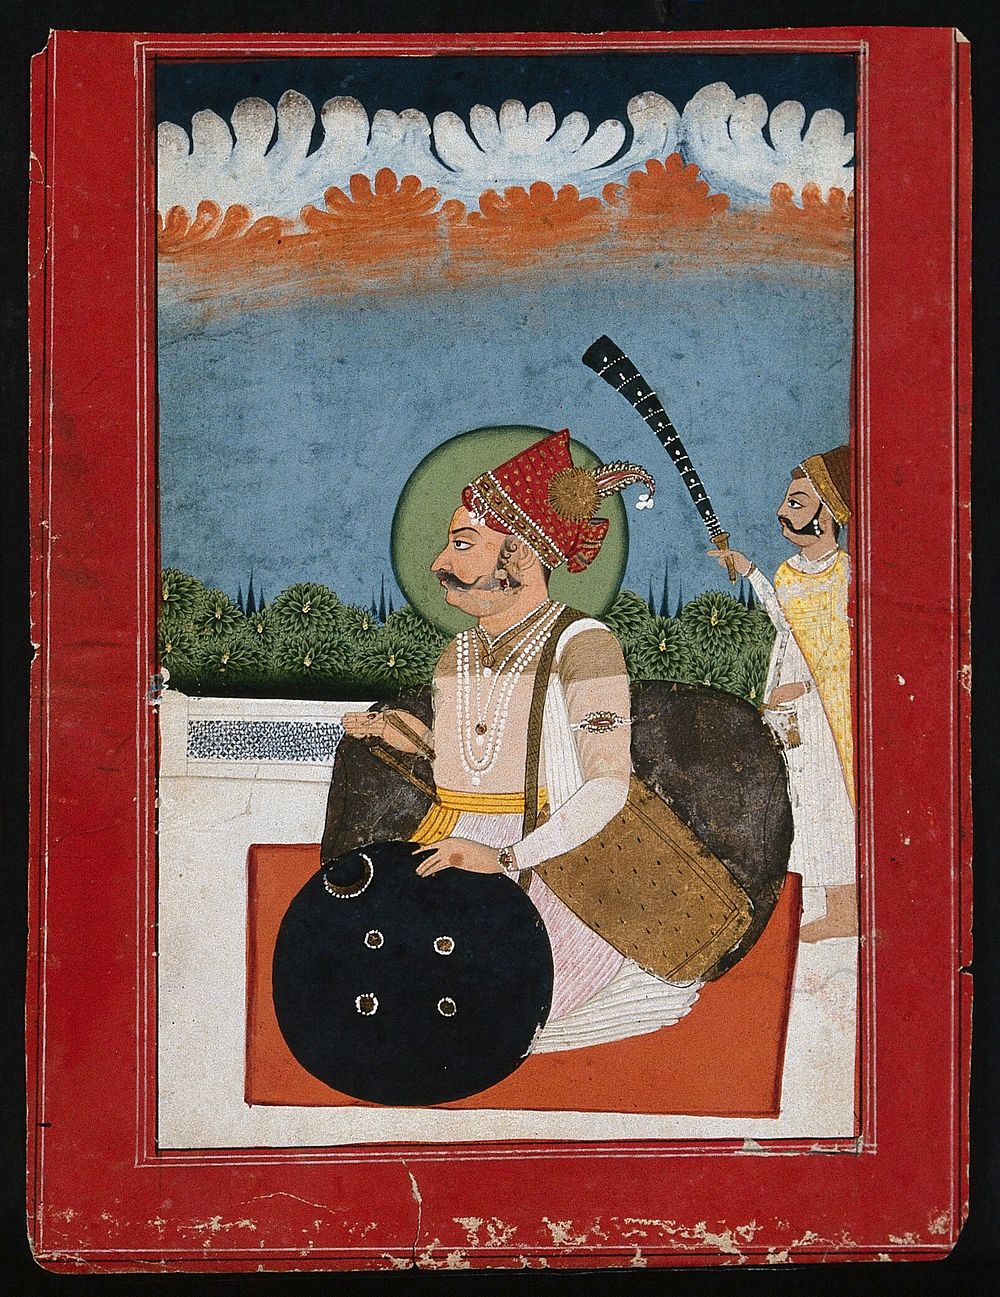 A Rajput Maharaja with an attendant standing behind. Gouache painting by an Indian painter.